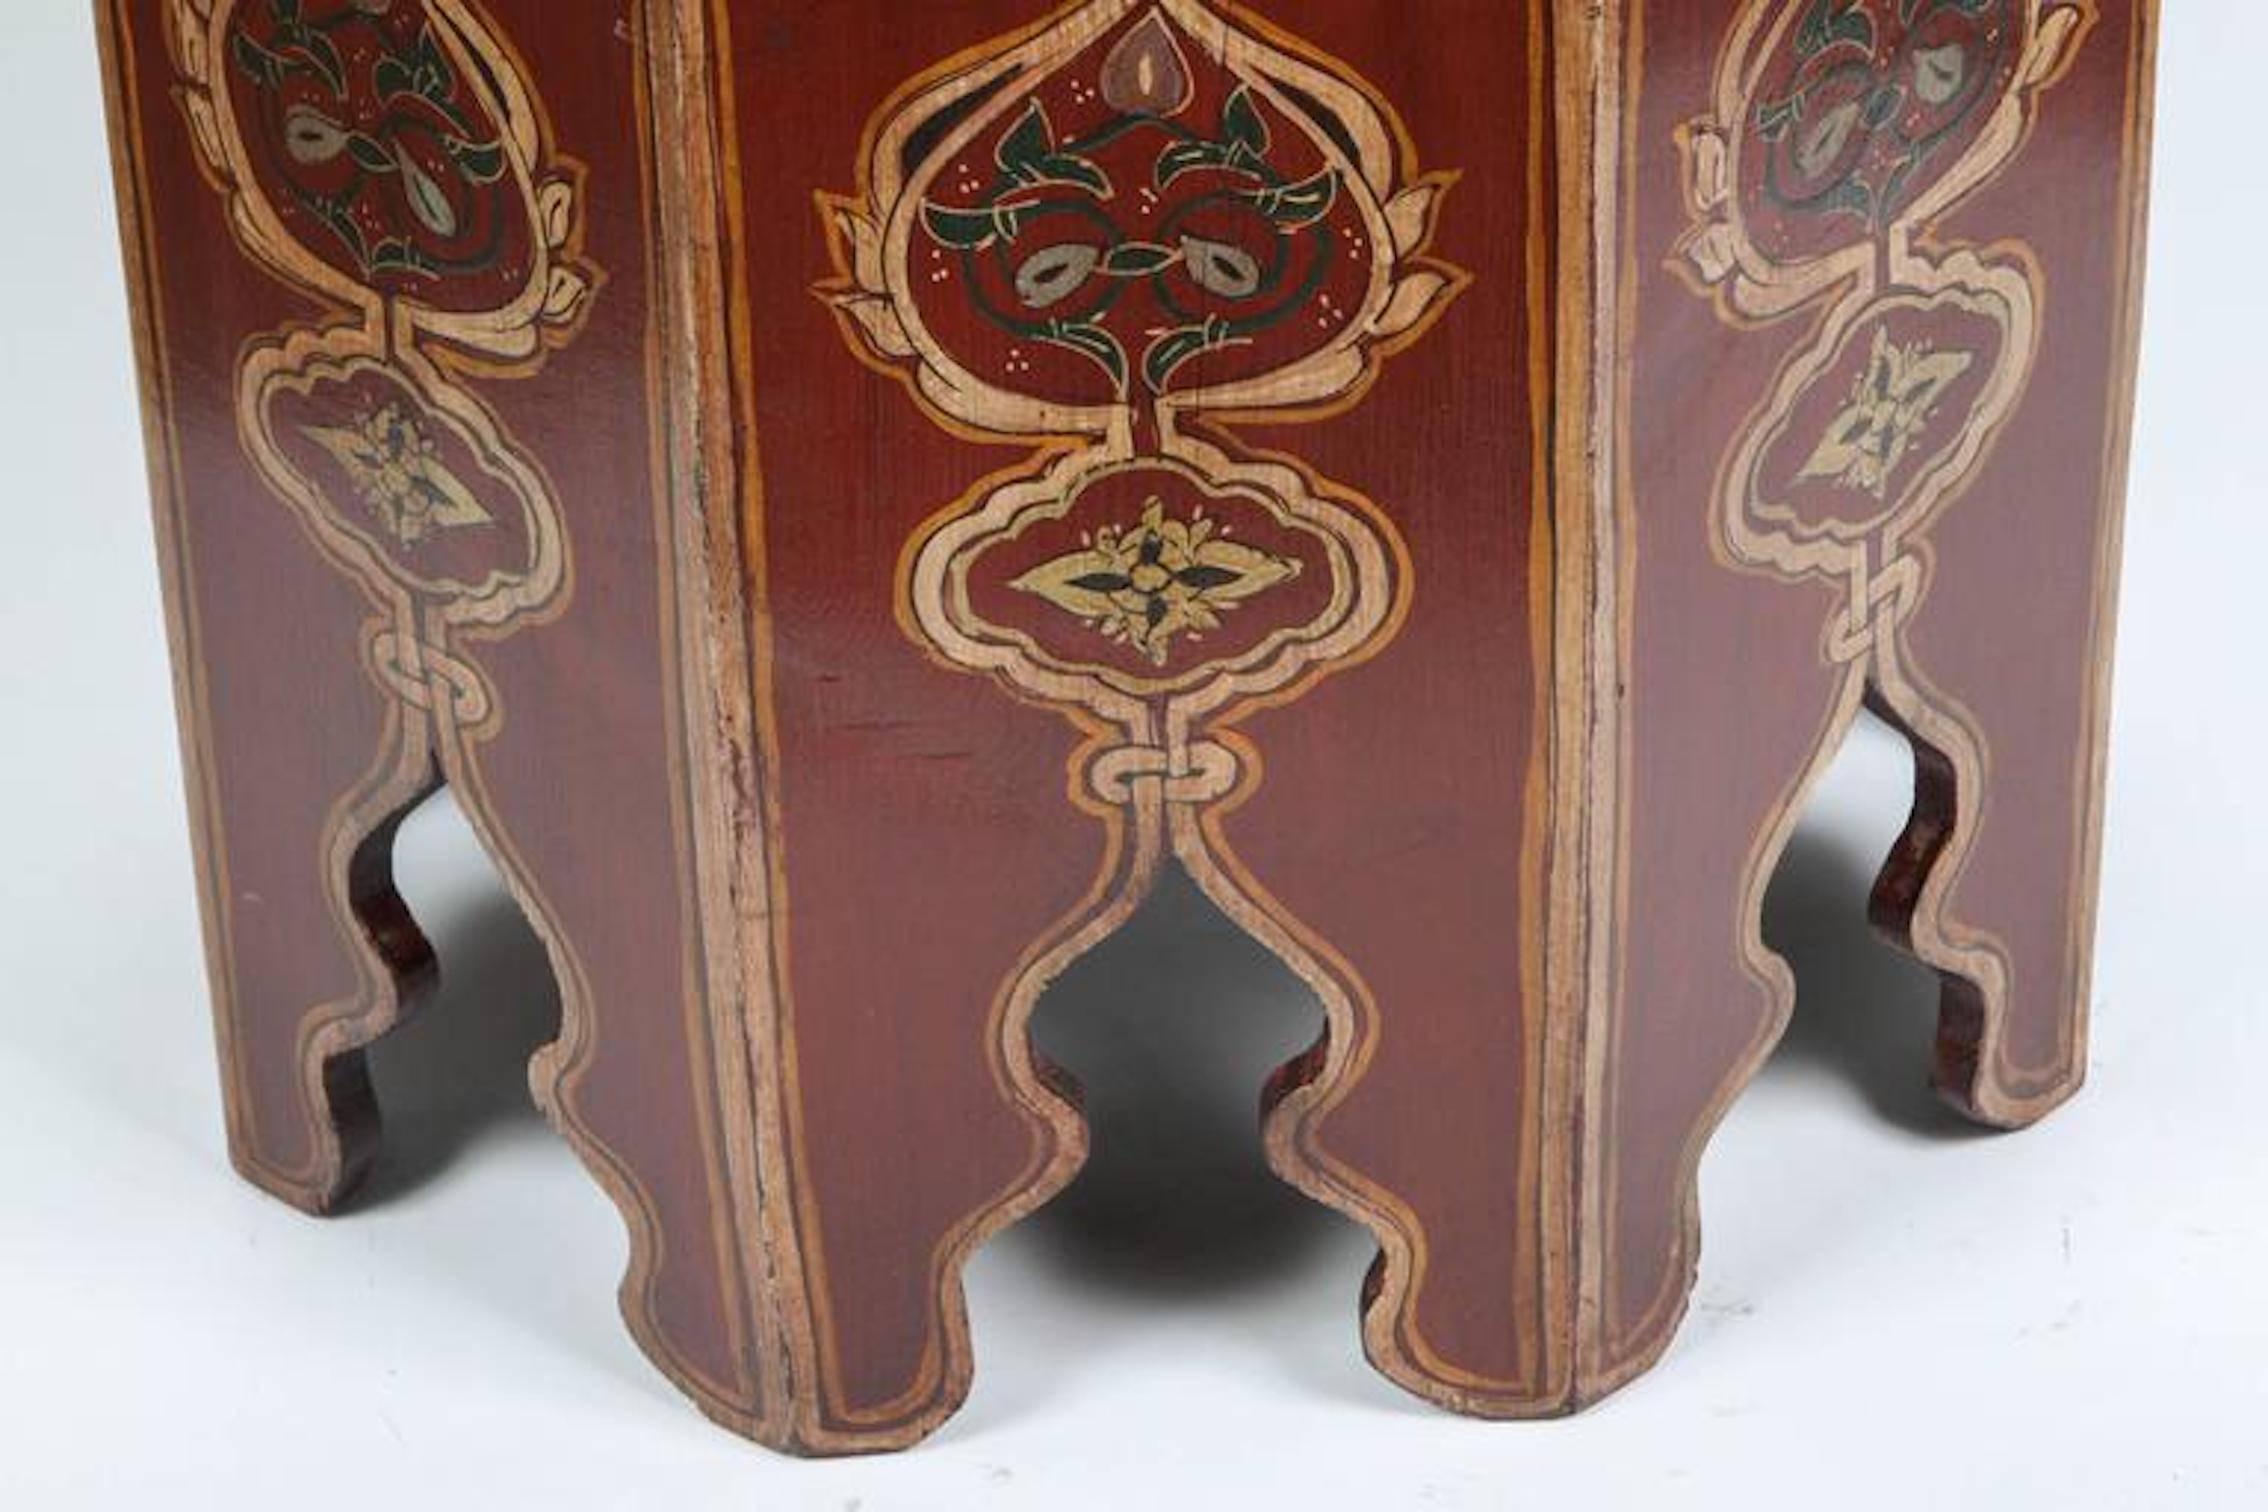 Hand-Crafted Moroccan Hand-Painted Side Table with Moorish Designs